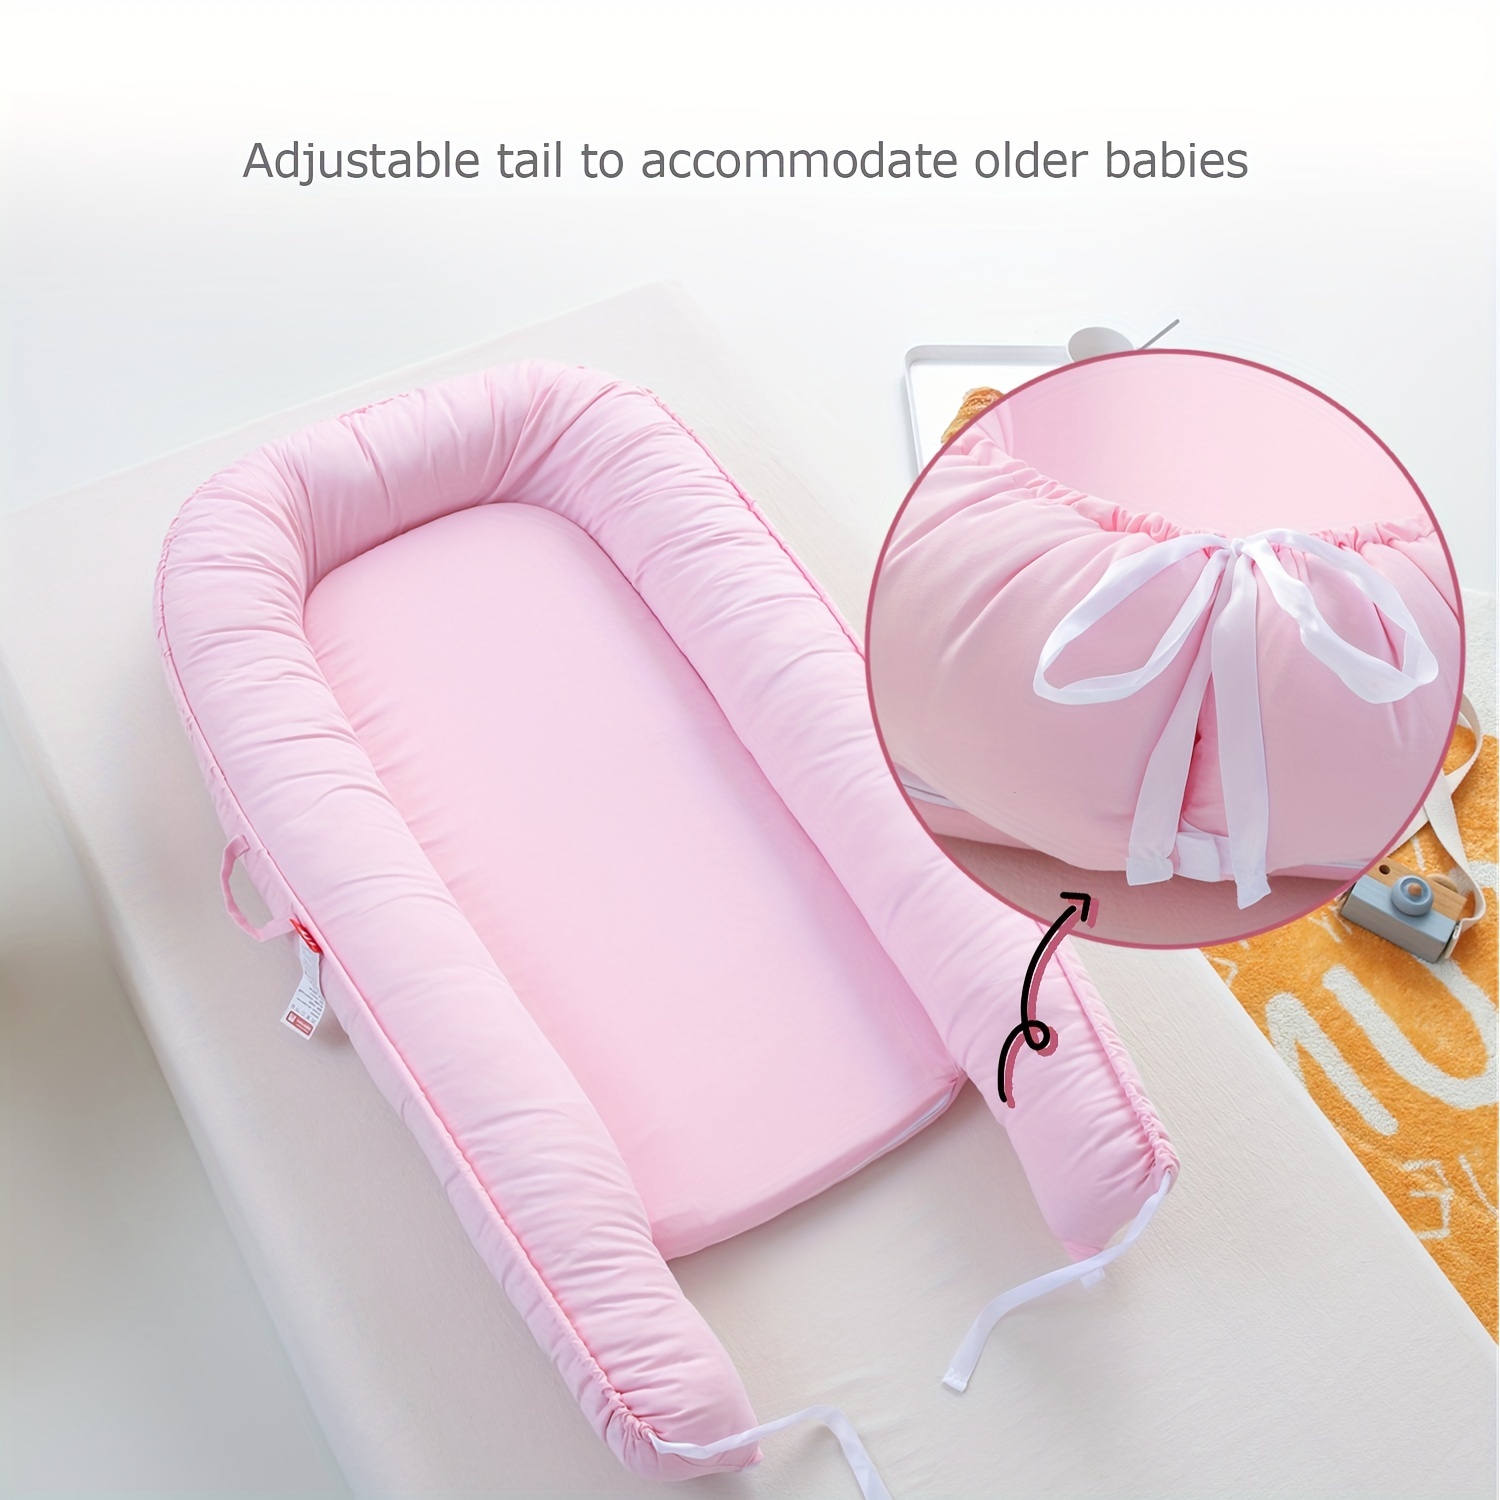 Baby Nest Bionic Bed, Infant Sleeper Bed